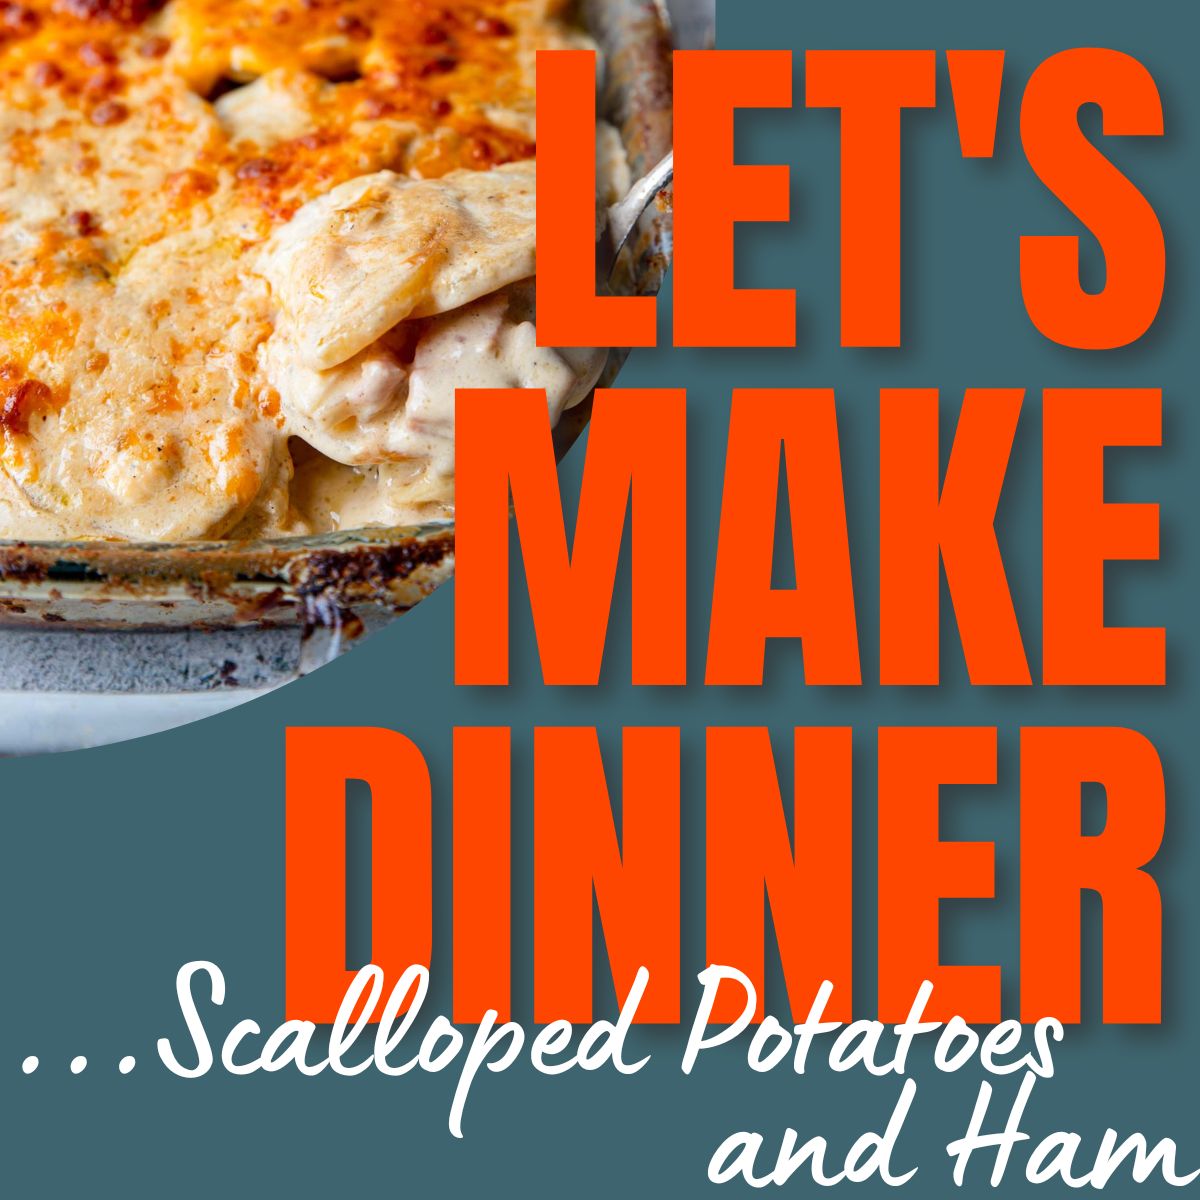 scalloped potatoes and ham with text overlay for let's make dinner podcast